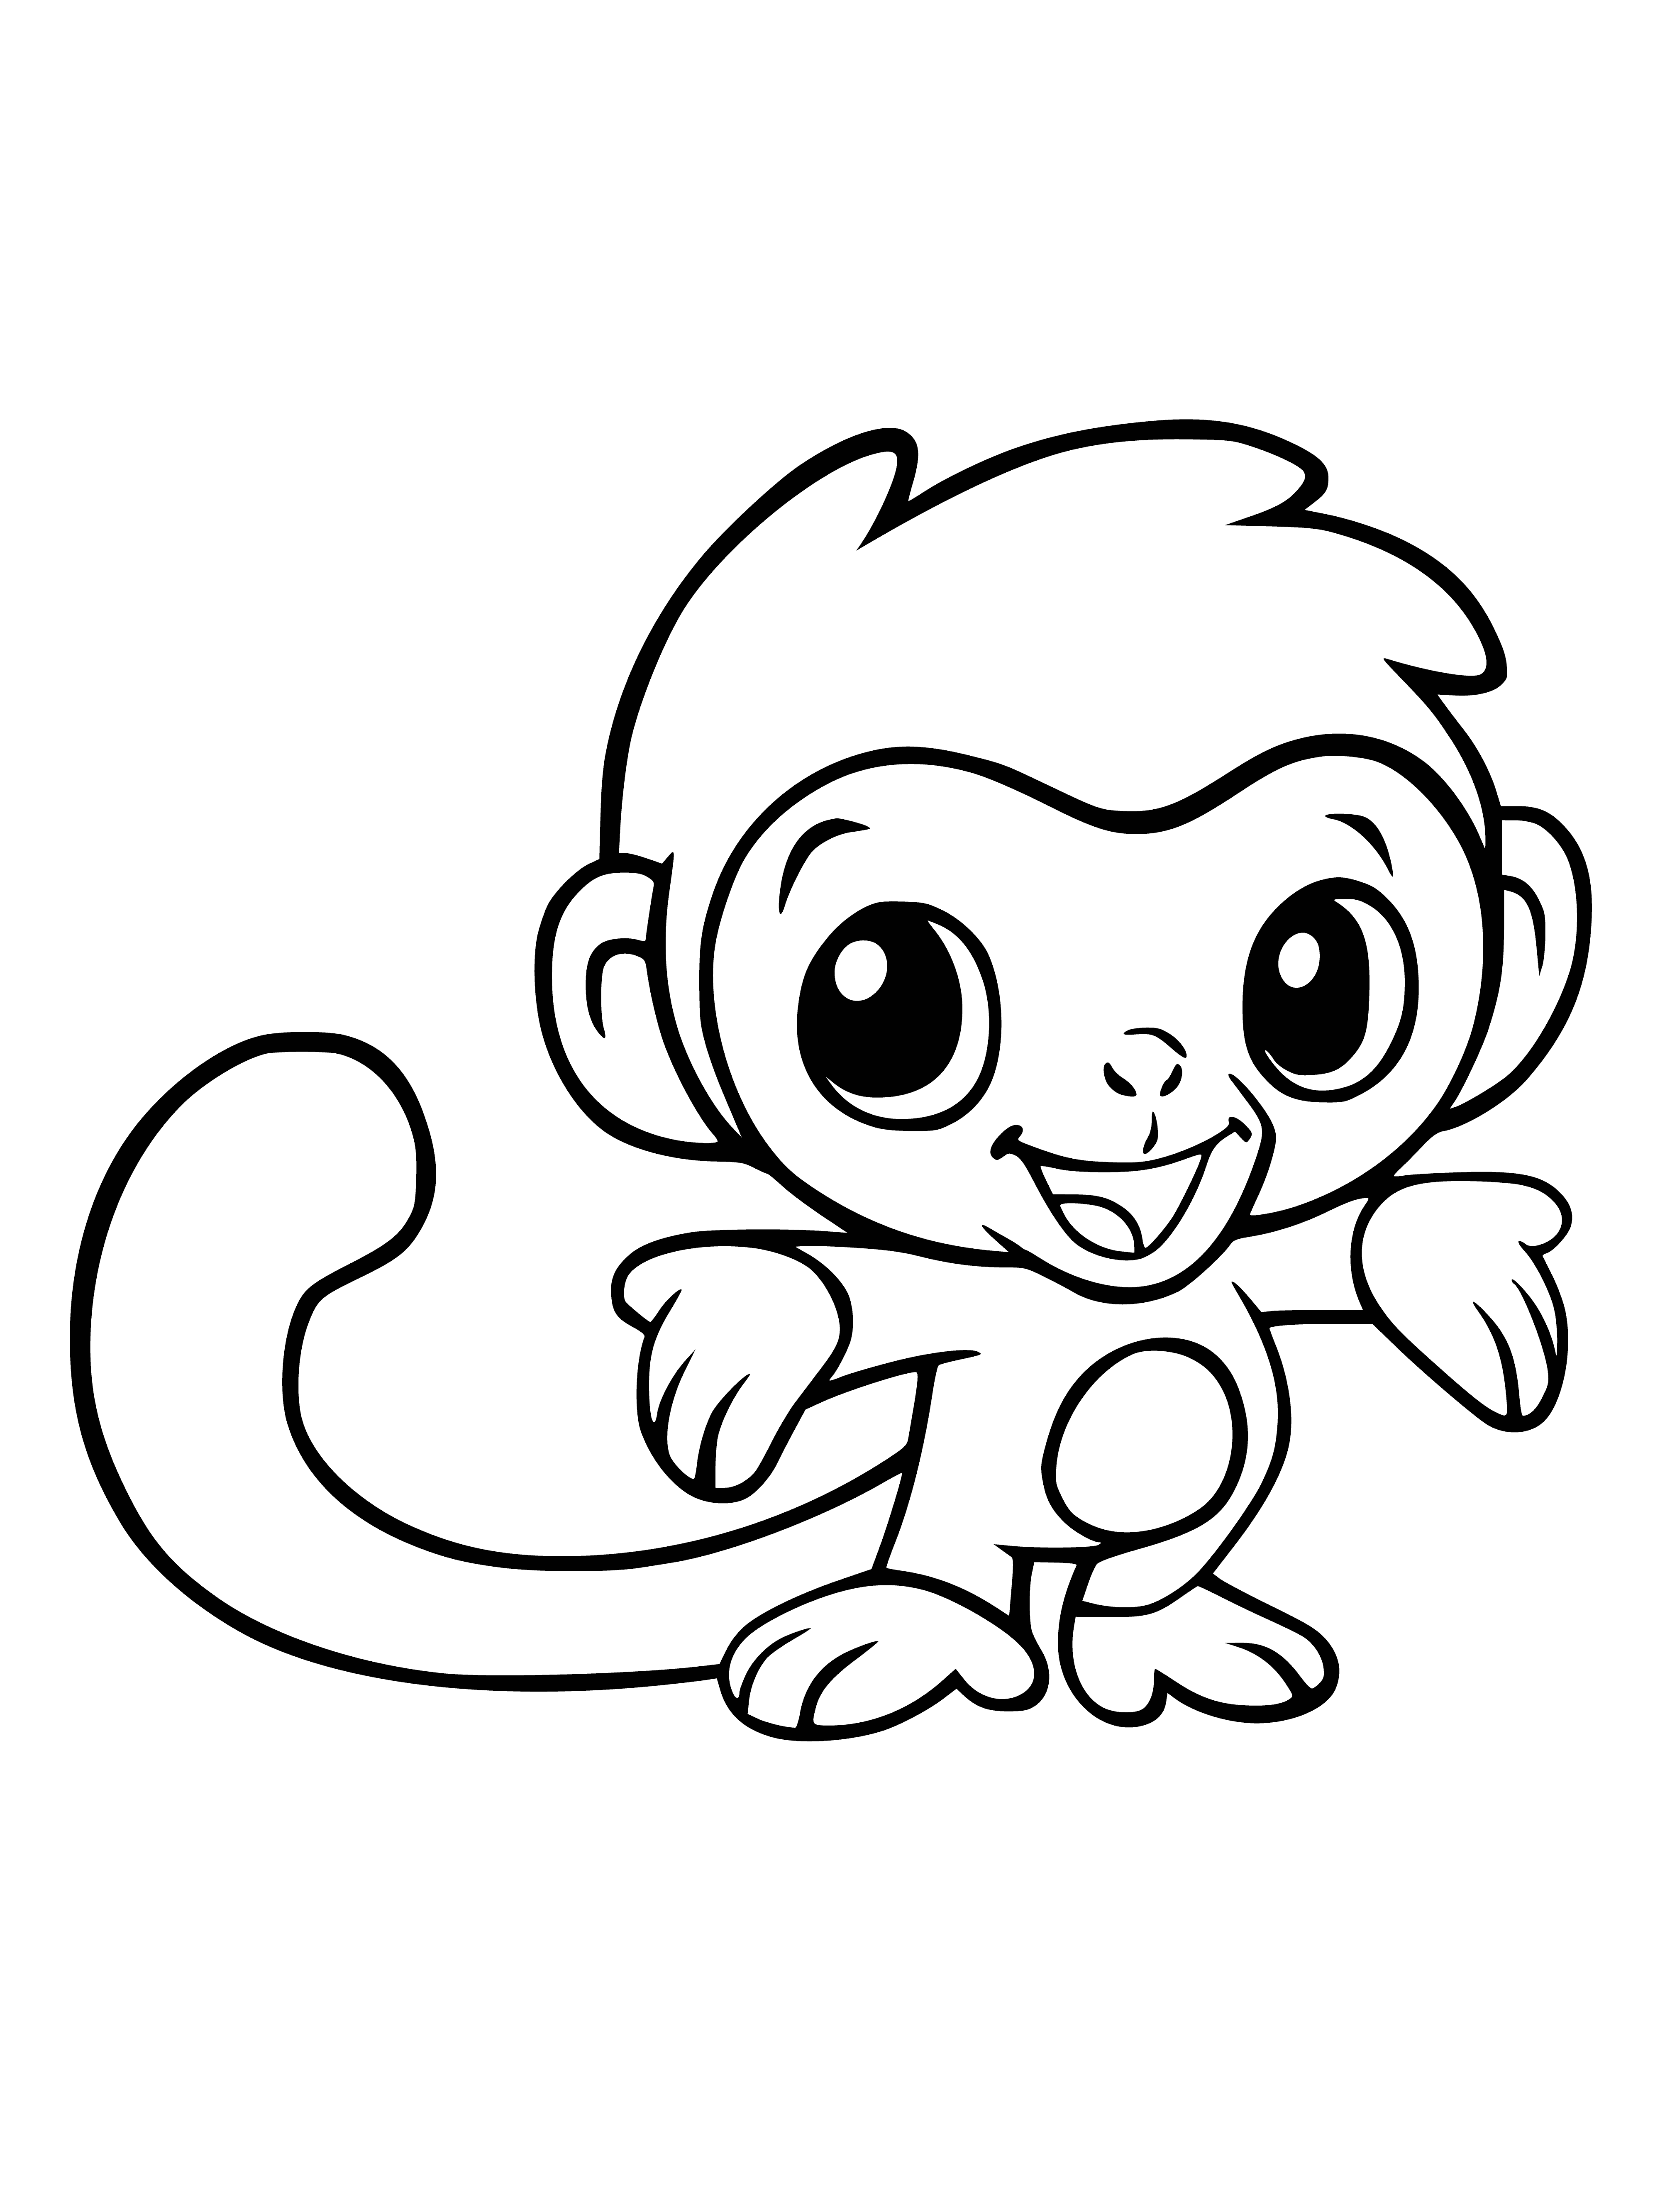 coloring page: Small monkey stands on a tree branch, brown body & yellow face with long tail - gazing off to the side.